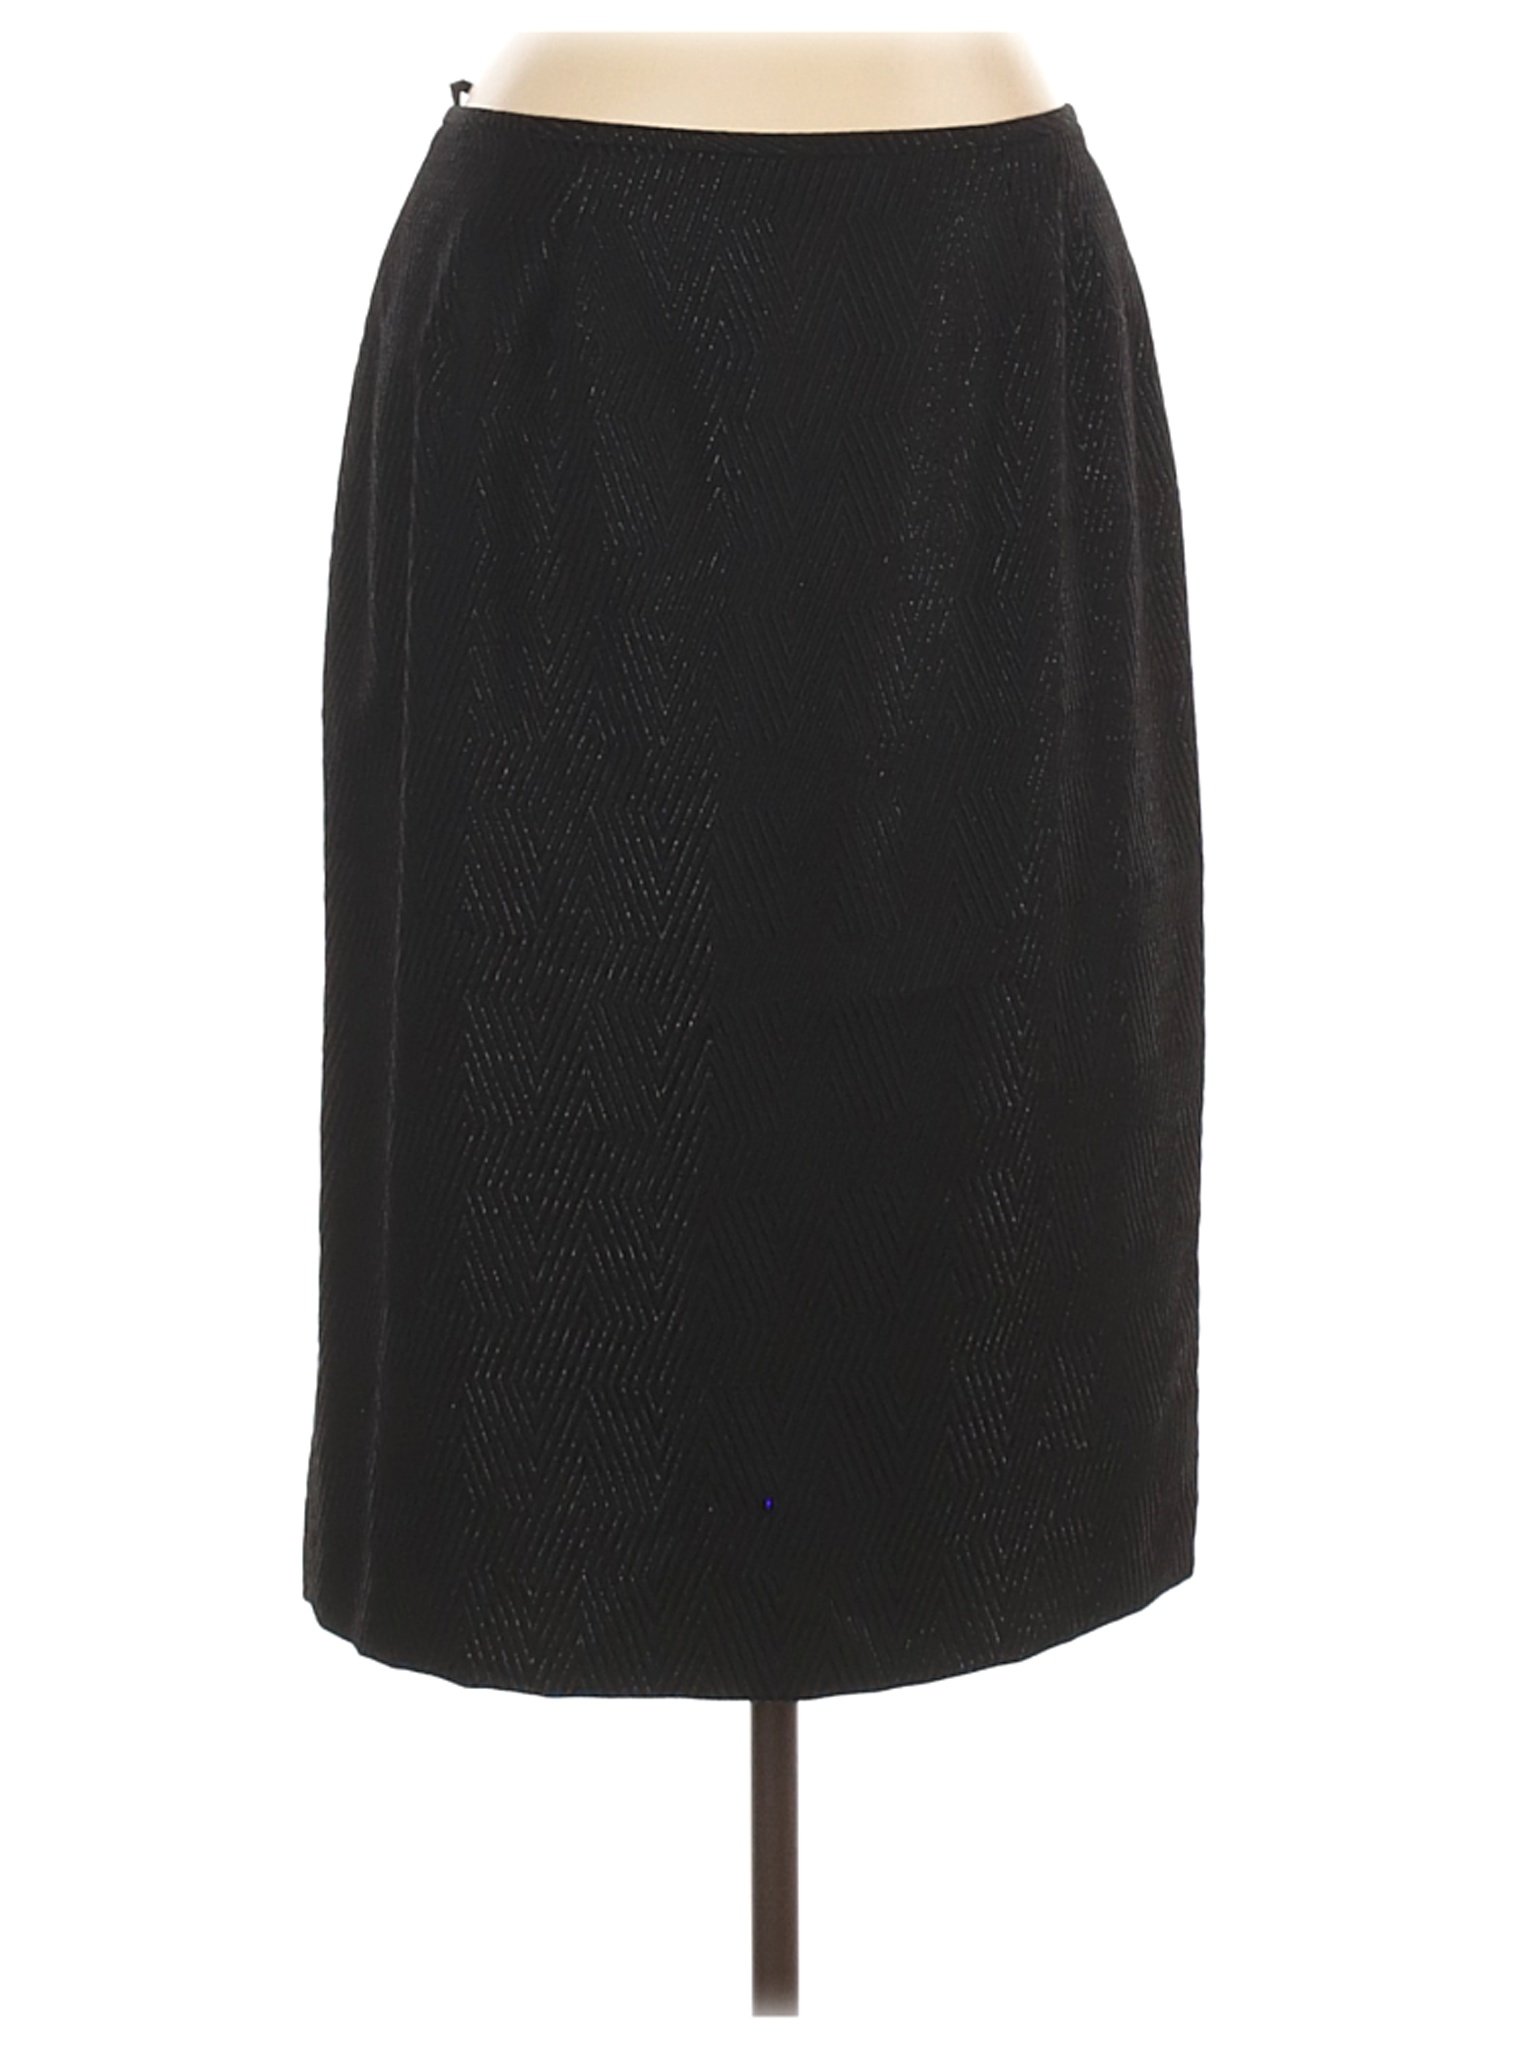 Collections for Le Suit Women Black Casual Skirt 12 | eBay